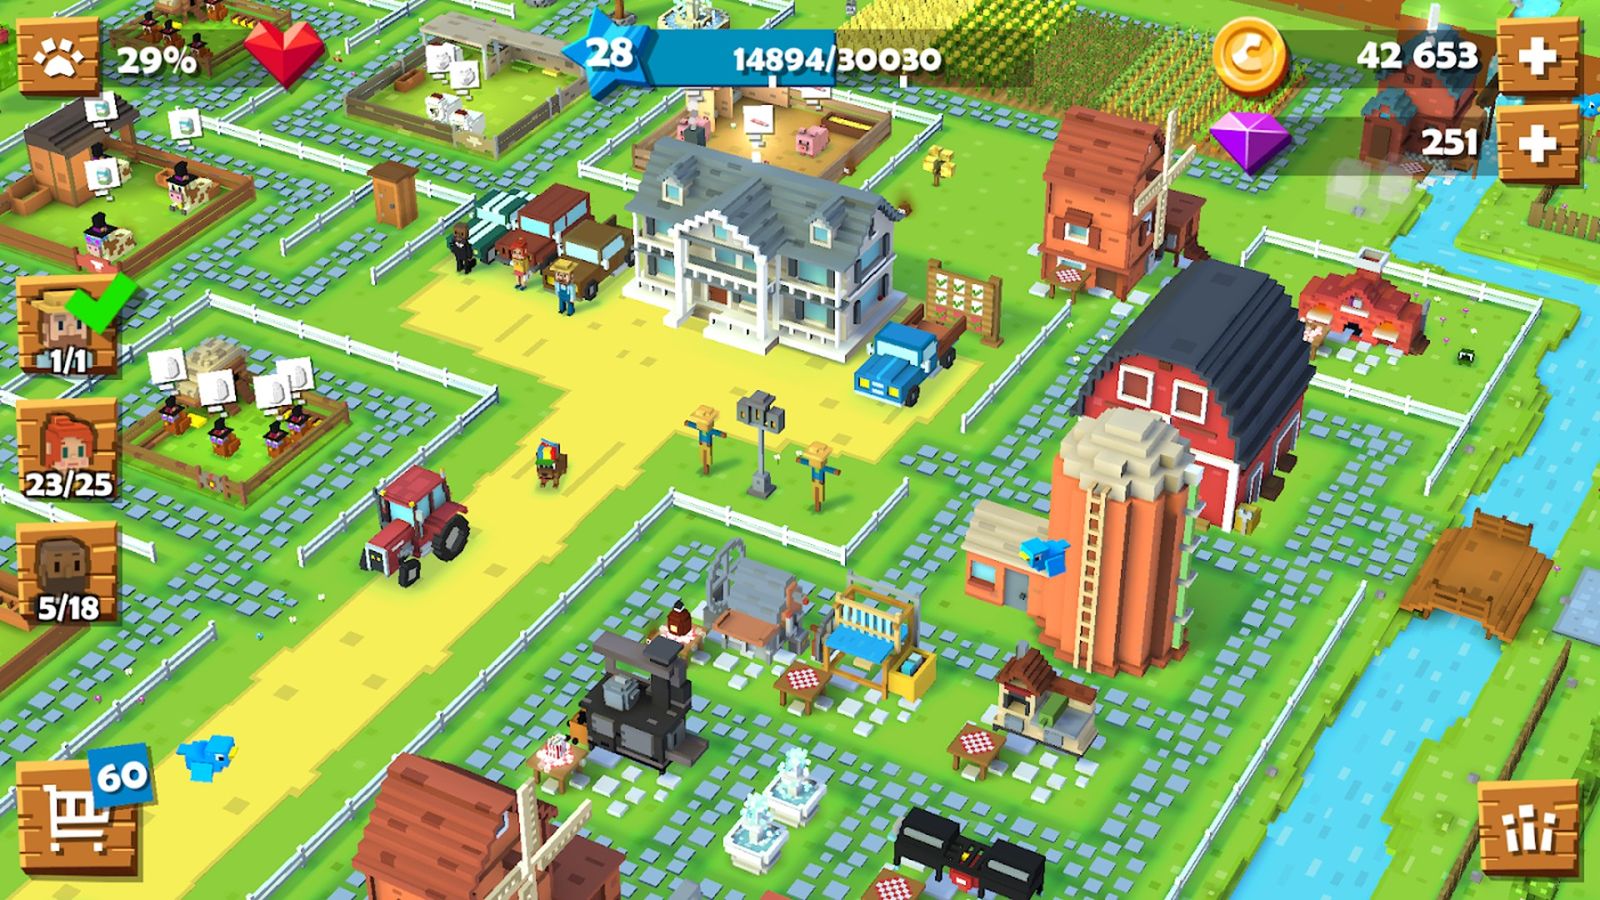 Screenshot from Bricky Farm, showing the pixellated farm landscape with animals and crops.